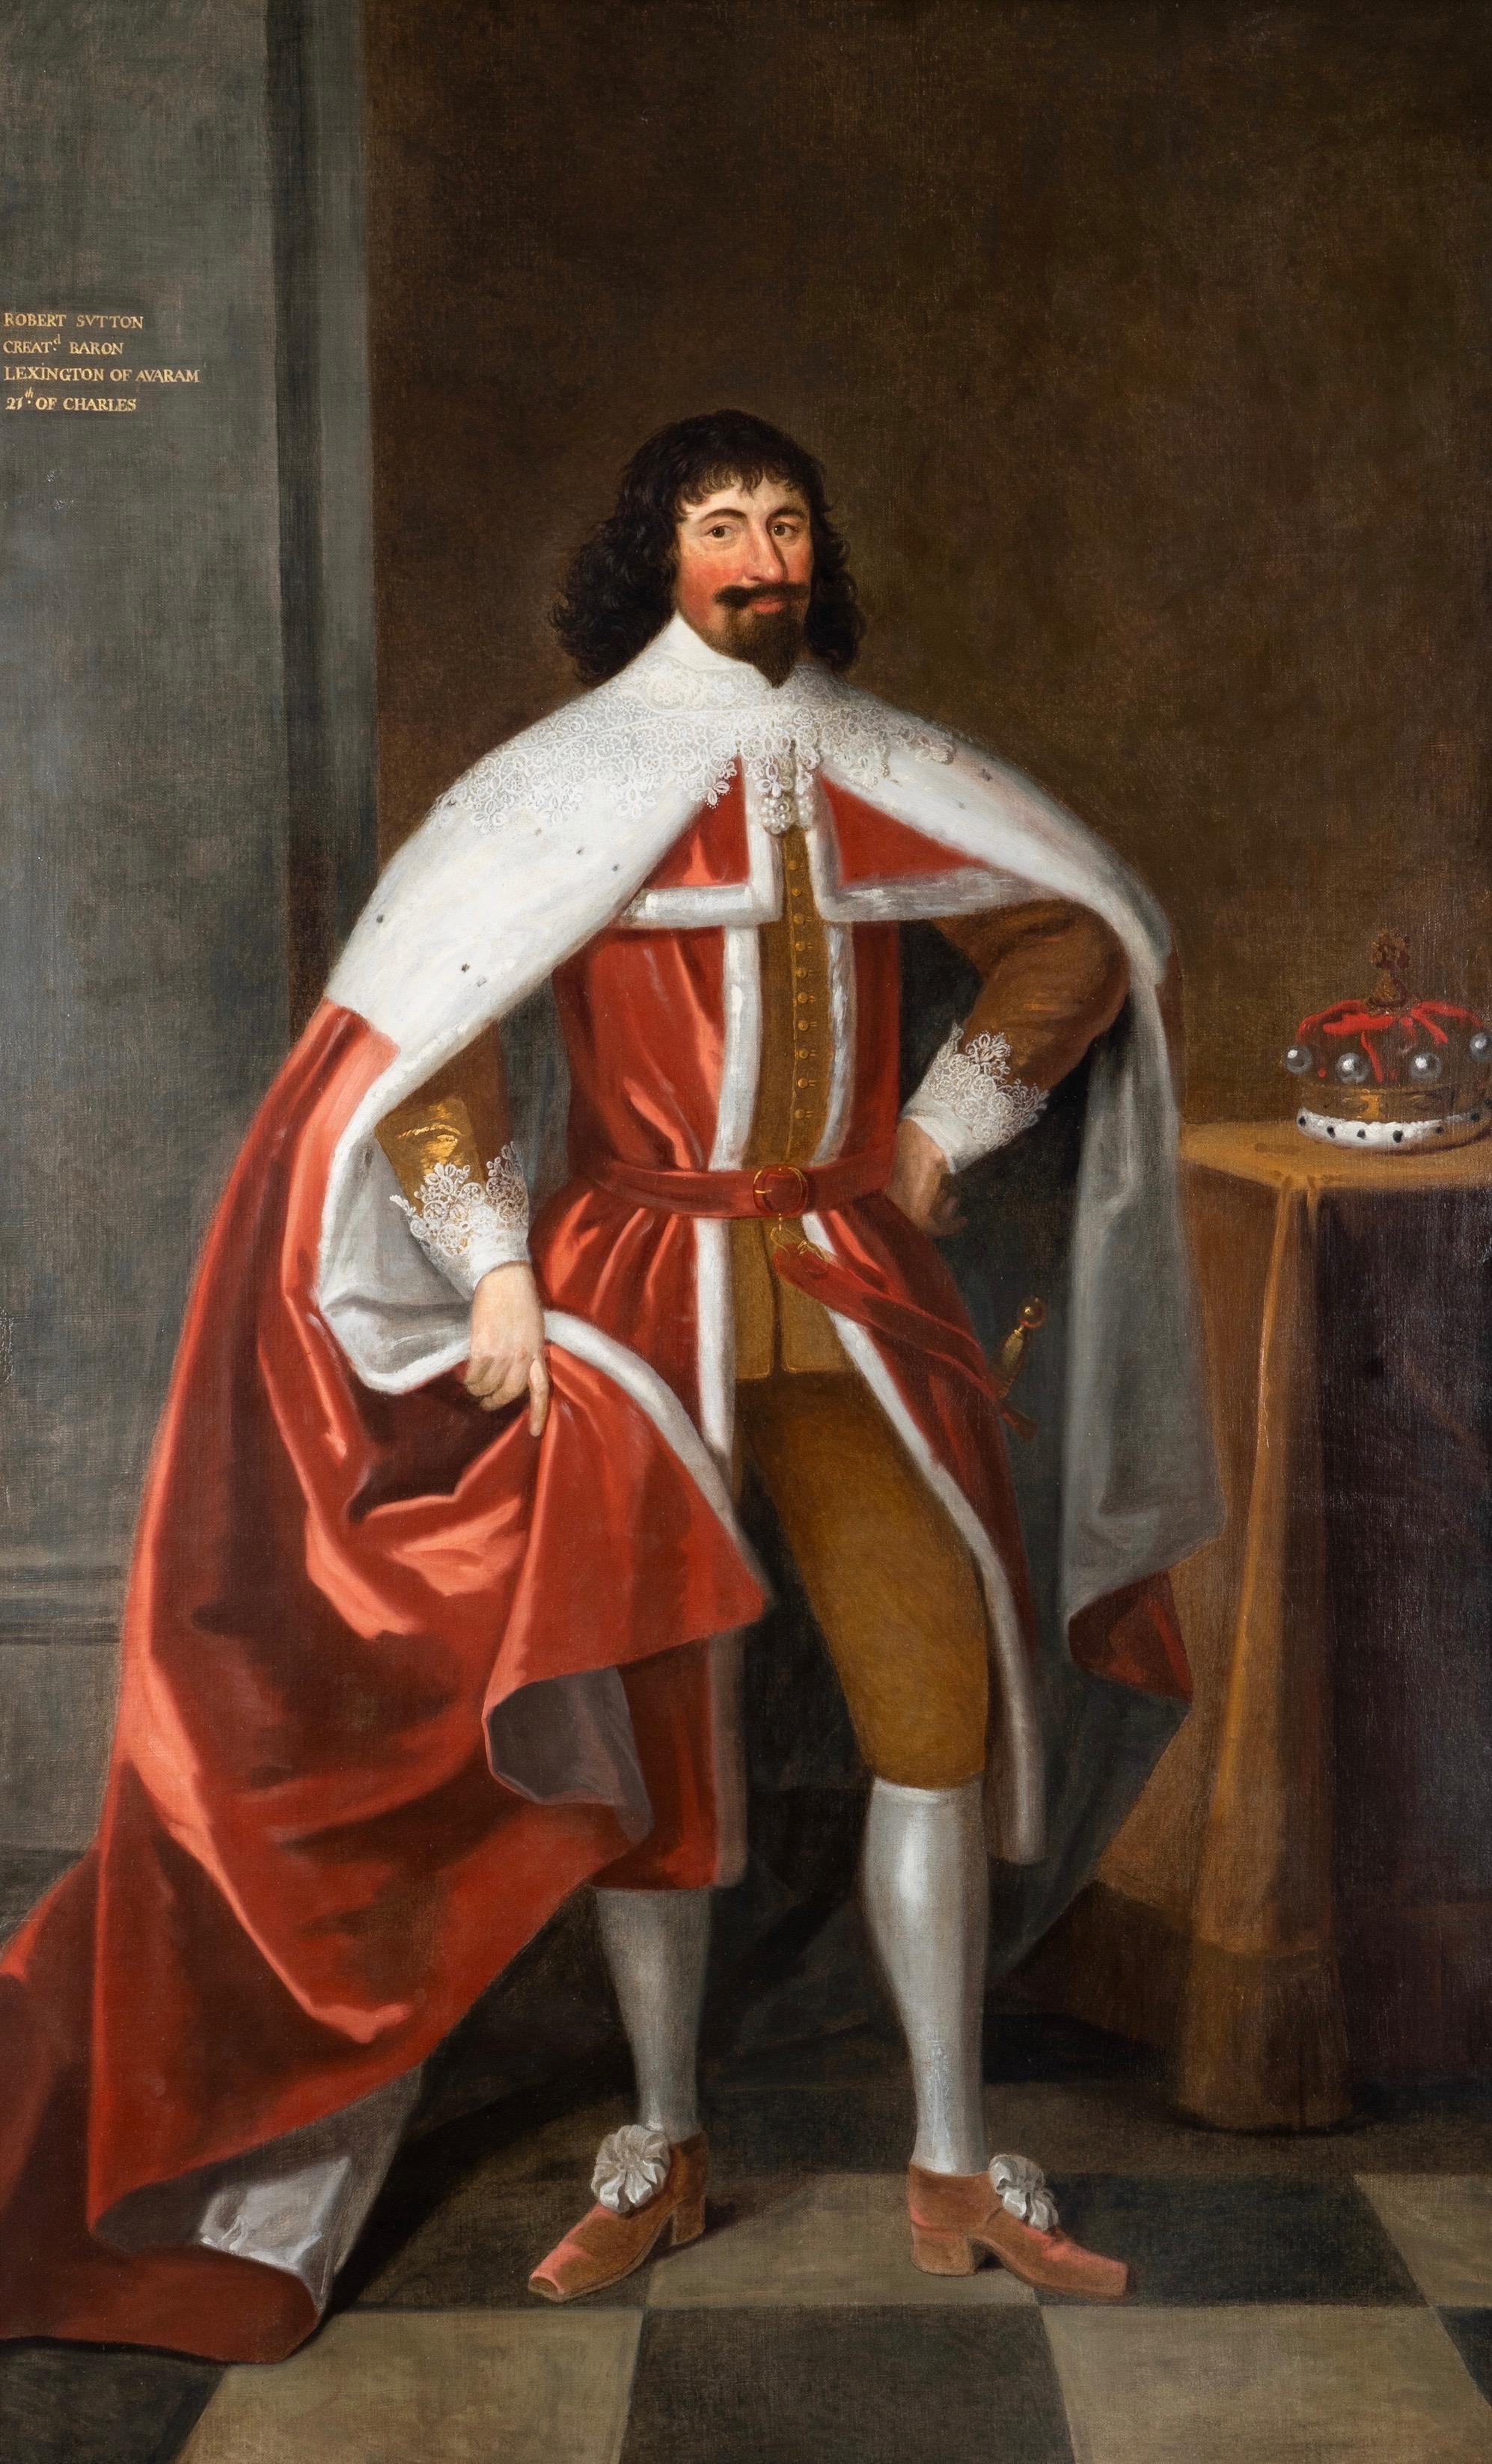 Unknown Portrait Painting - Enormous 17th Century British Portrait of Baron Lexington in Red Peers Robes 